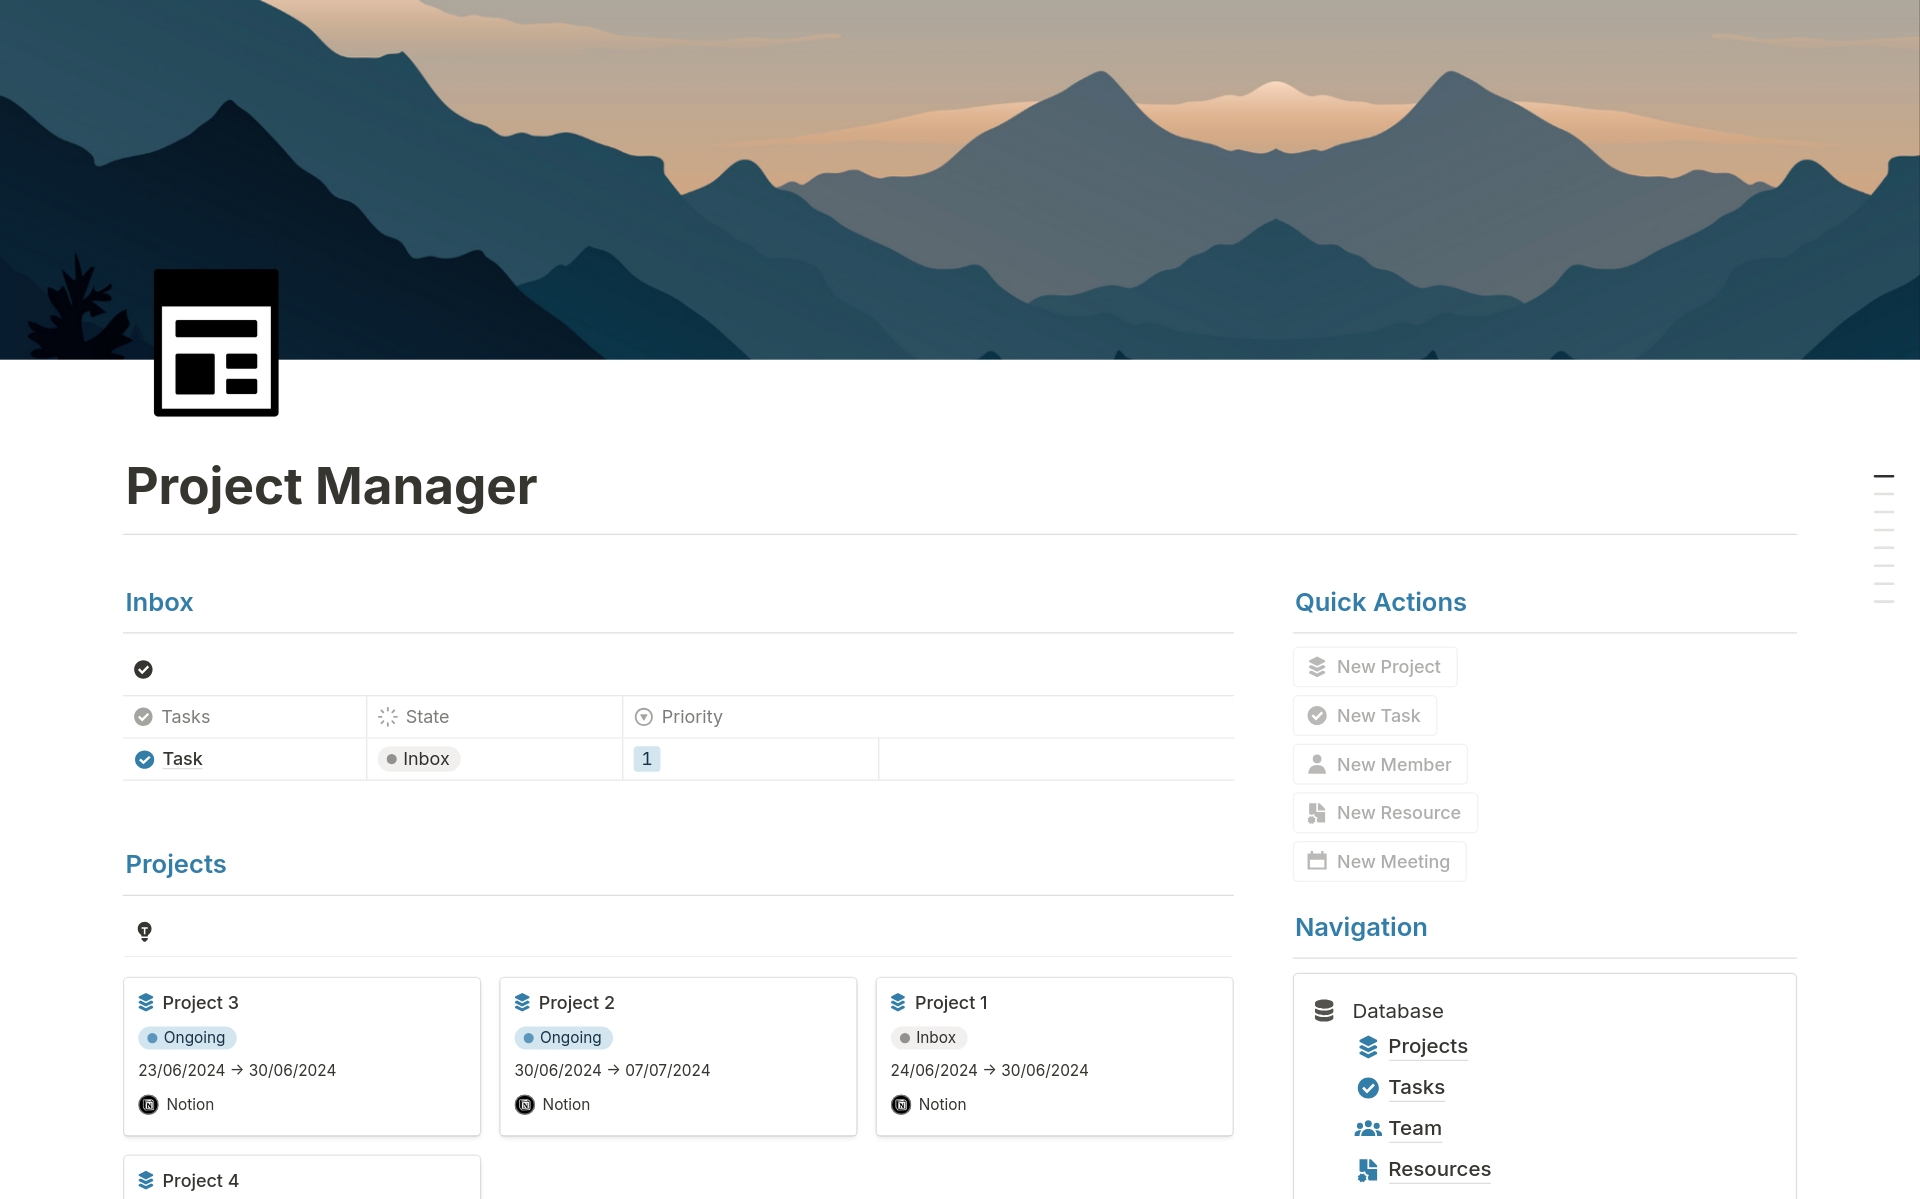 Managing projects with multiple tasks, deadlines and collaborators can be a challenge without the right tool. Our Project Manager template in Notion provides you with everything you need to plan, execute and complete your projects successfully.